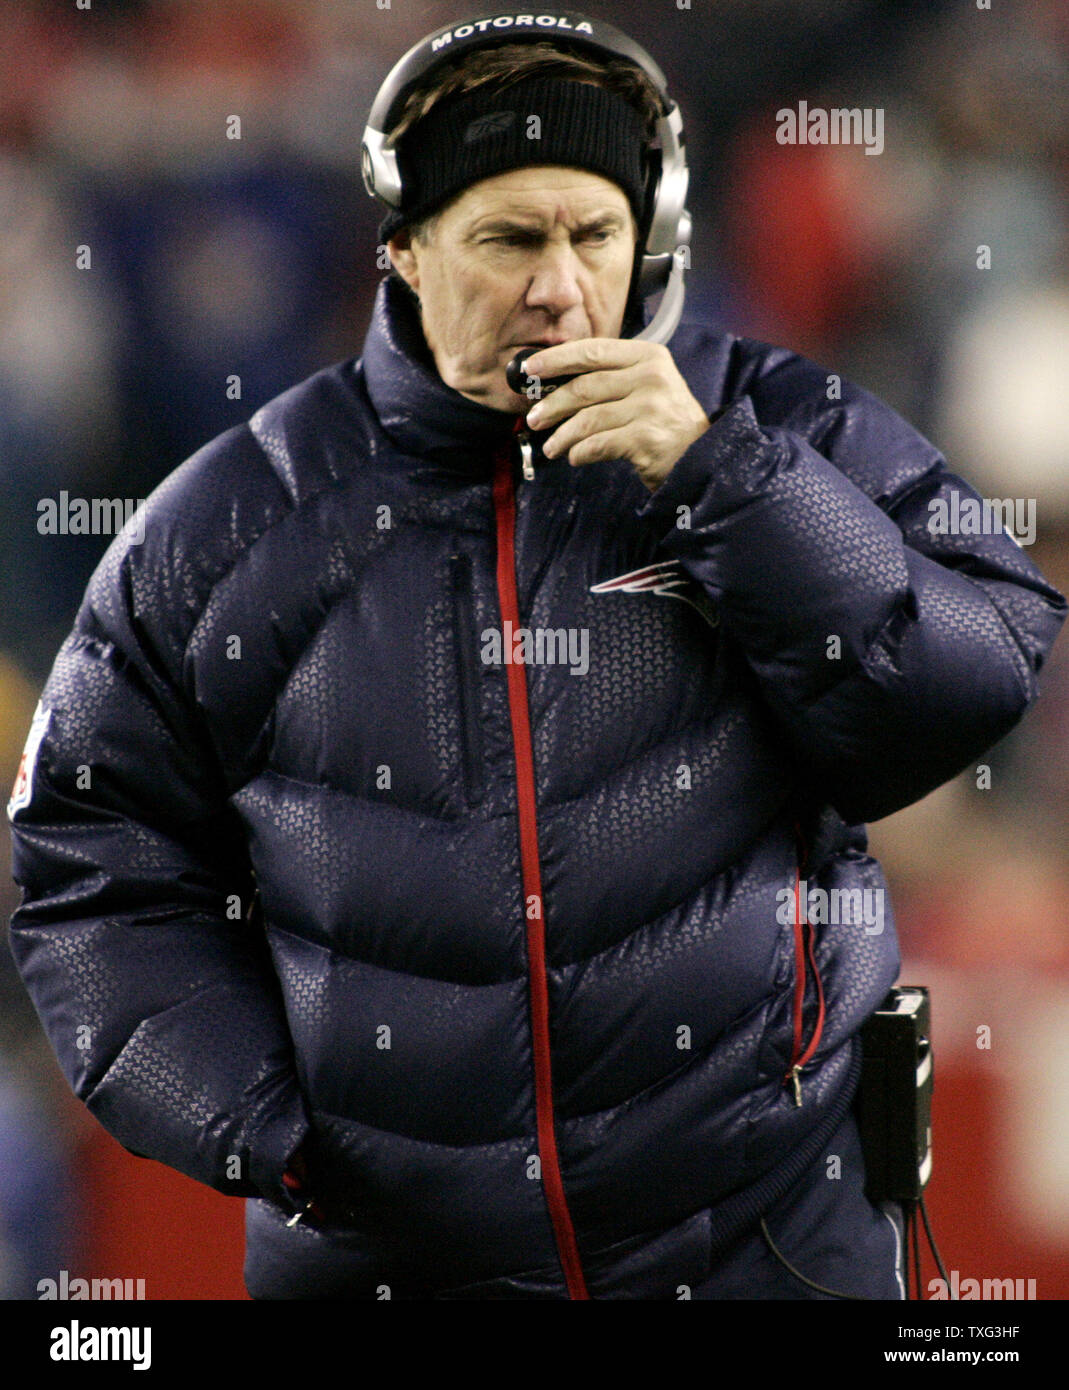 New England Patriots head coach Bill Belichick walks the sidelines in the second quarter against the Pittsburgh Steelers at Gillette Stadium in Foxboro, Massachusetts on December 9, 2007. The Patriots defeated the Steelers 34-13. (UPI Photo/Matthew Healey) Stock Photo